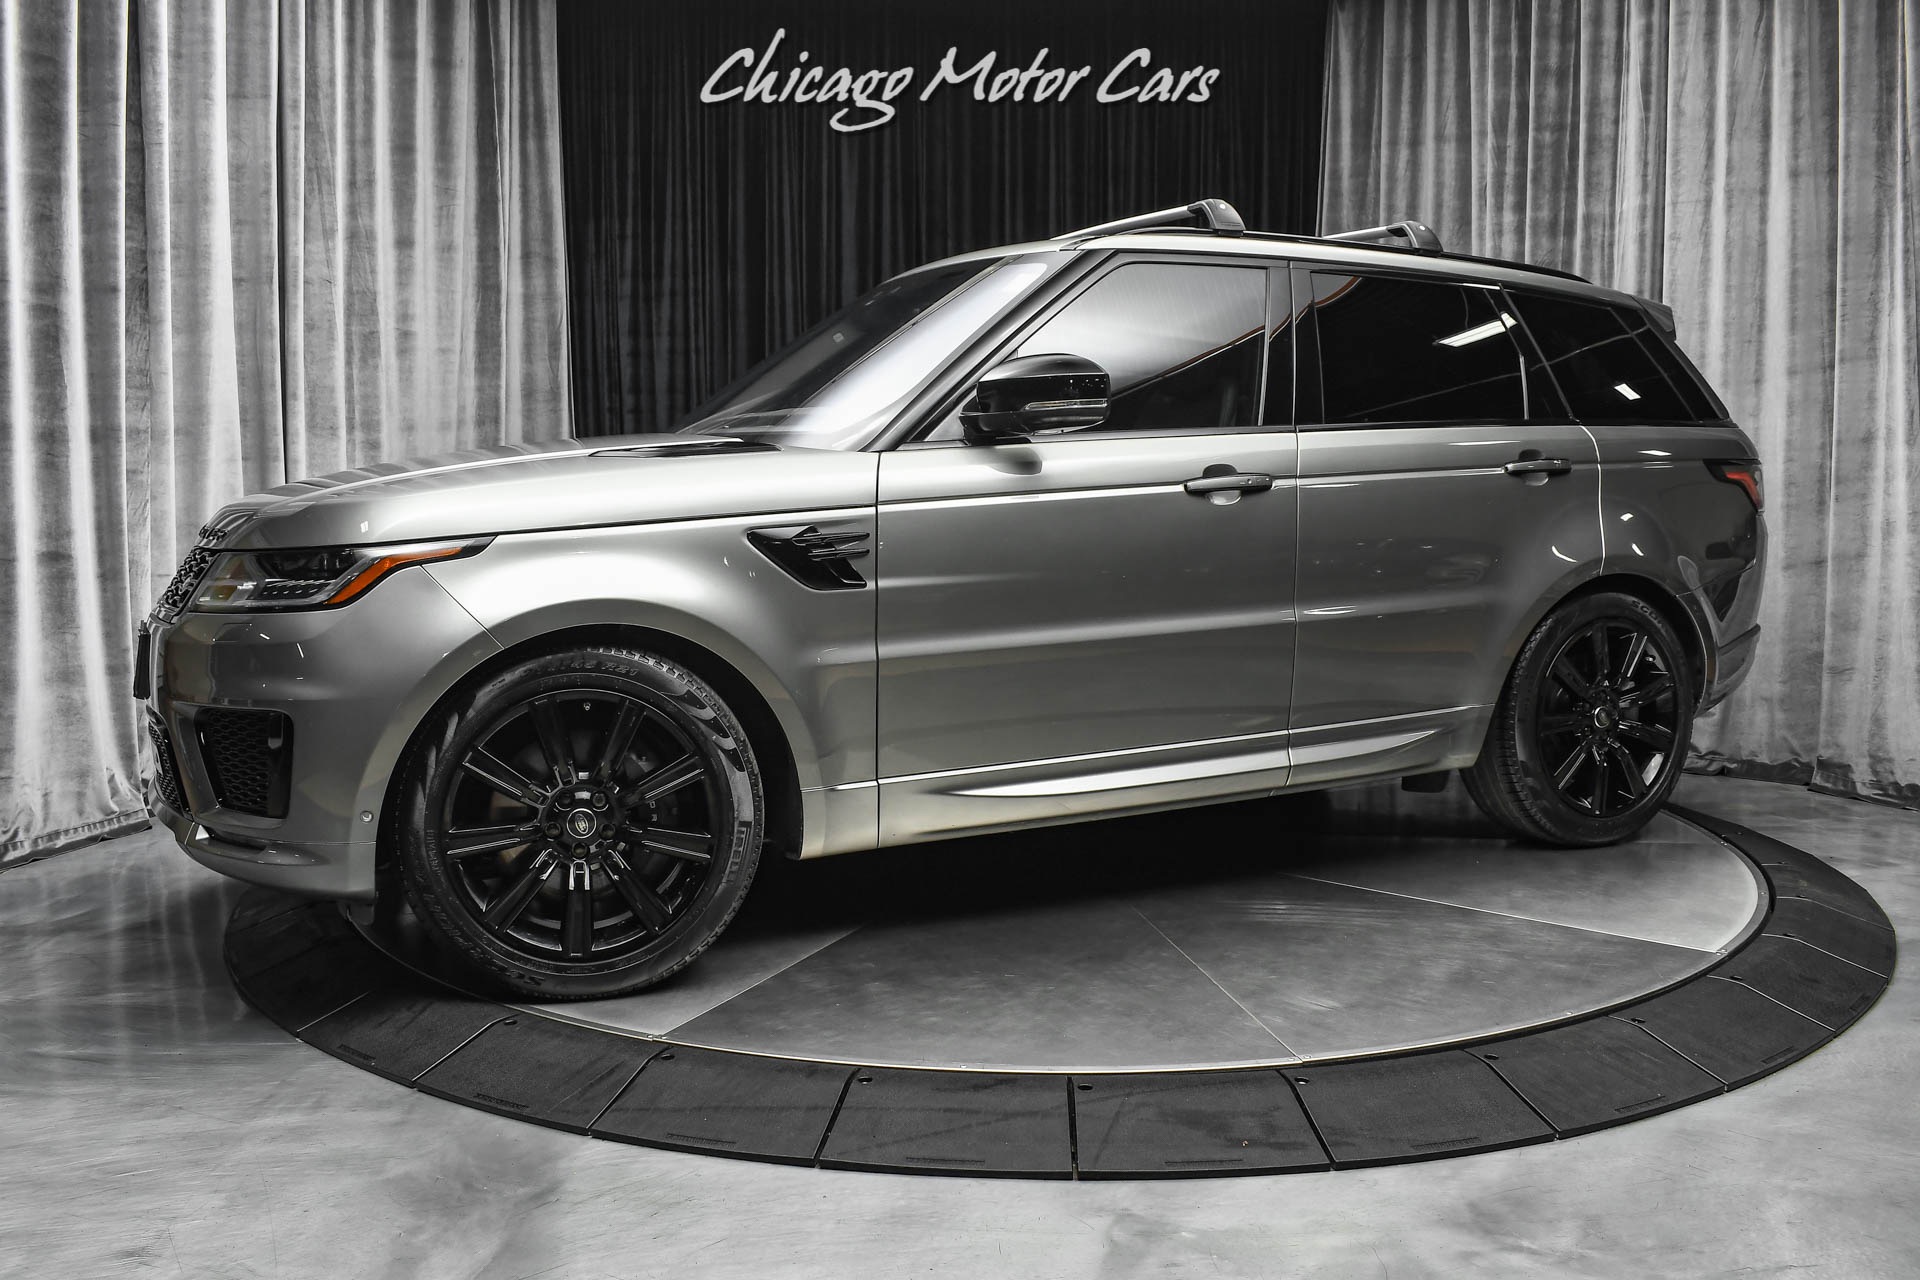 Used 2018 Land Rover Range Rover Sport HSE Dynamic $87k+MSRP! Panoramic  Roof! Soft Close Doors! Gorgeous! For Sale (Special Pricing) | Chicago  Motor Cars Stock #18107A